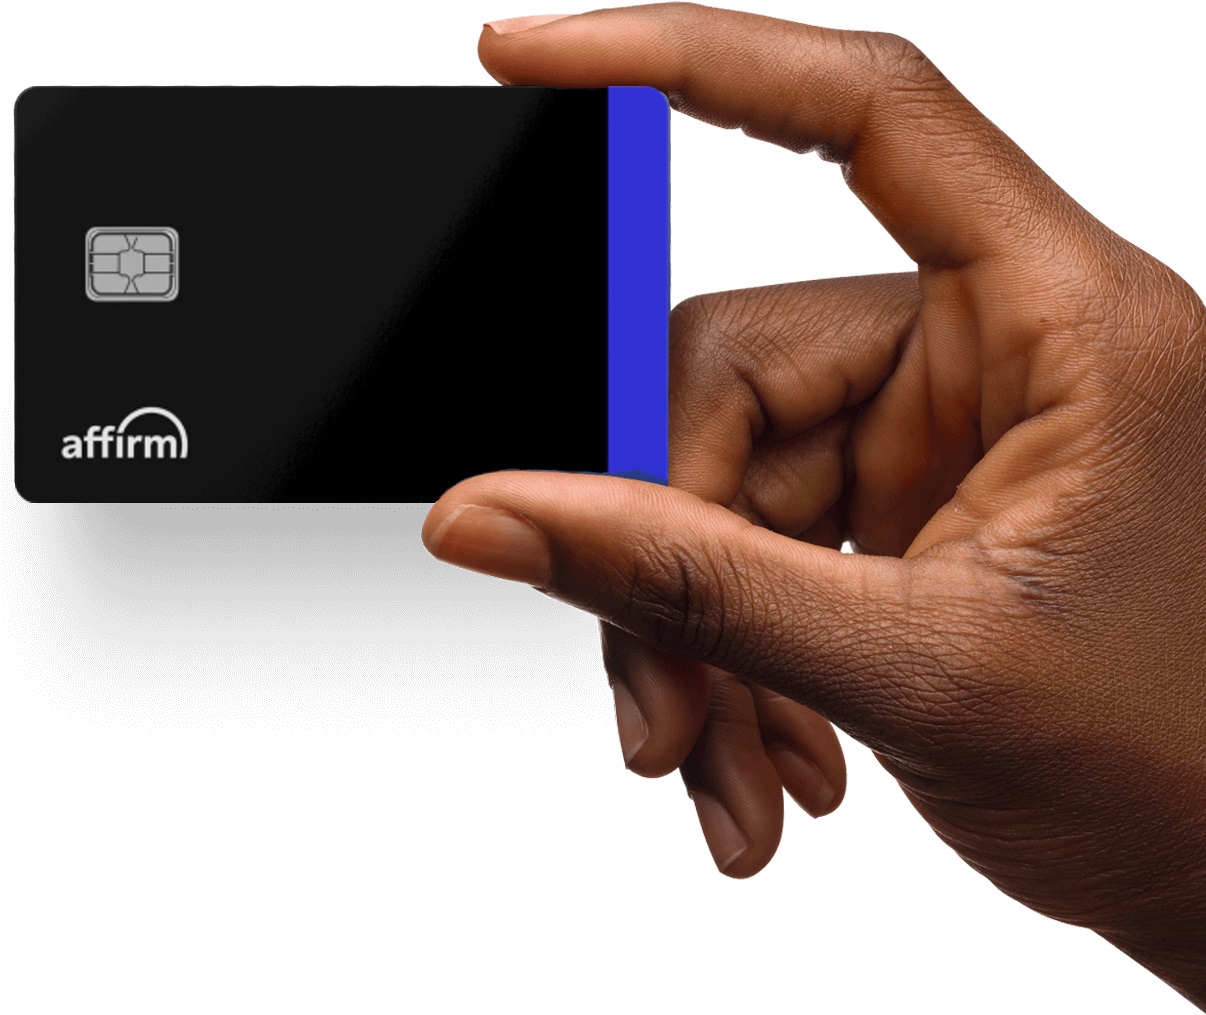 Affirm Introduces Affirm Card: A New Approach To Buy Now, Pay Later